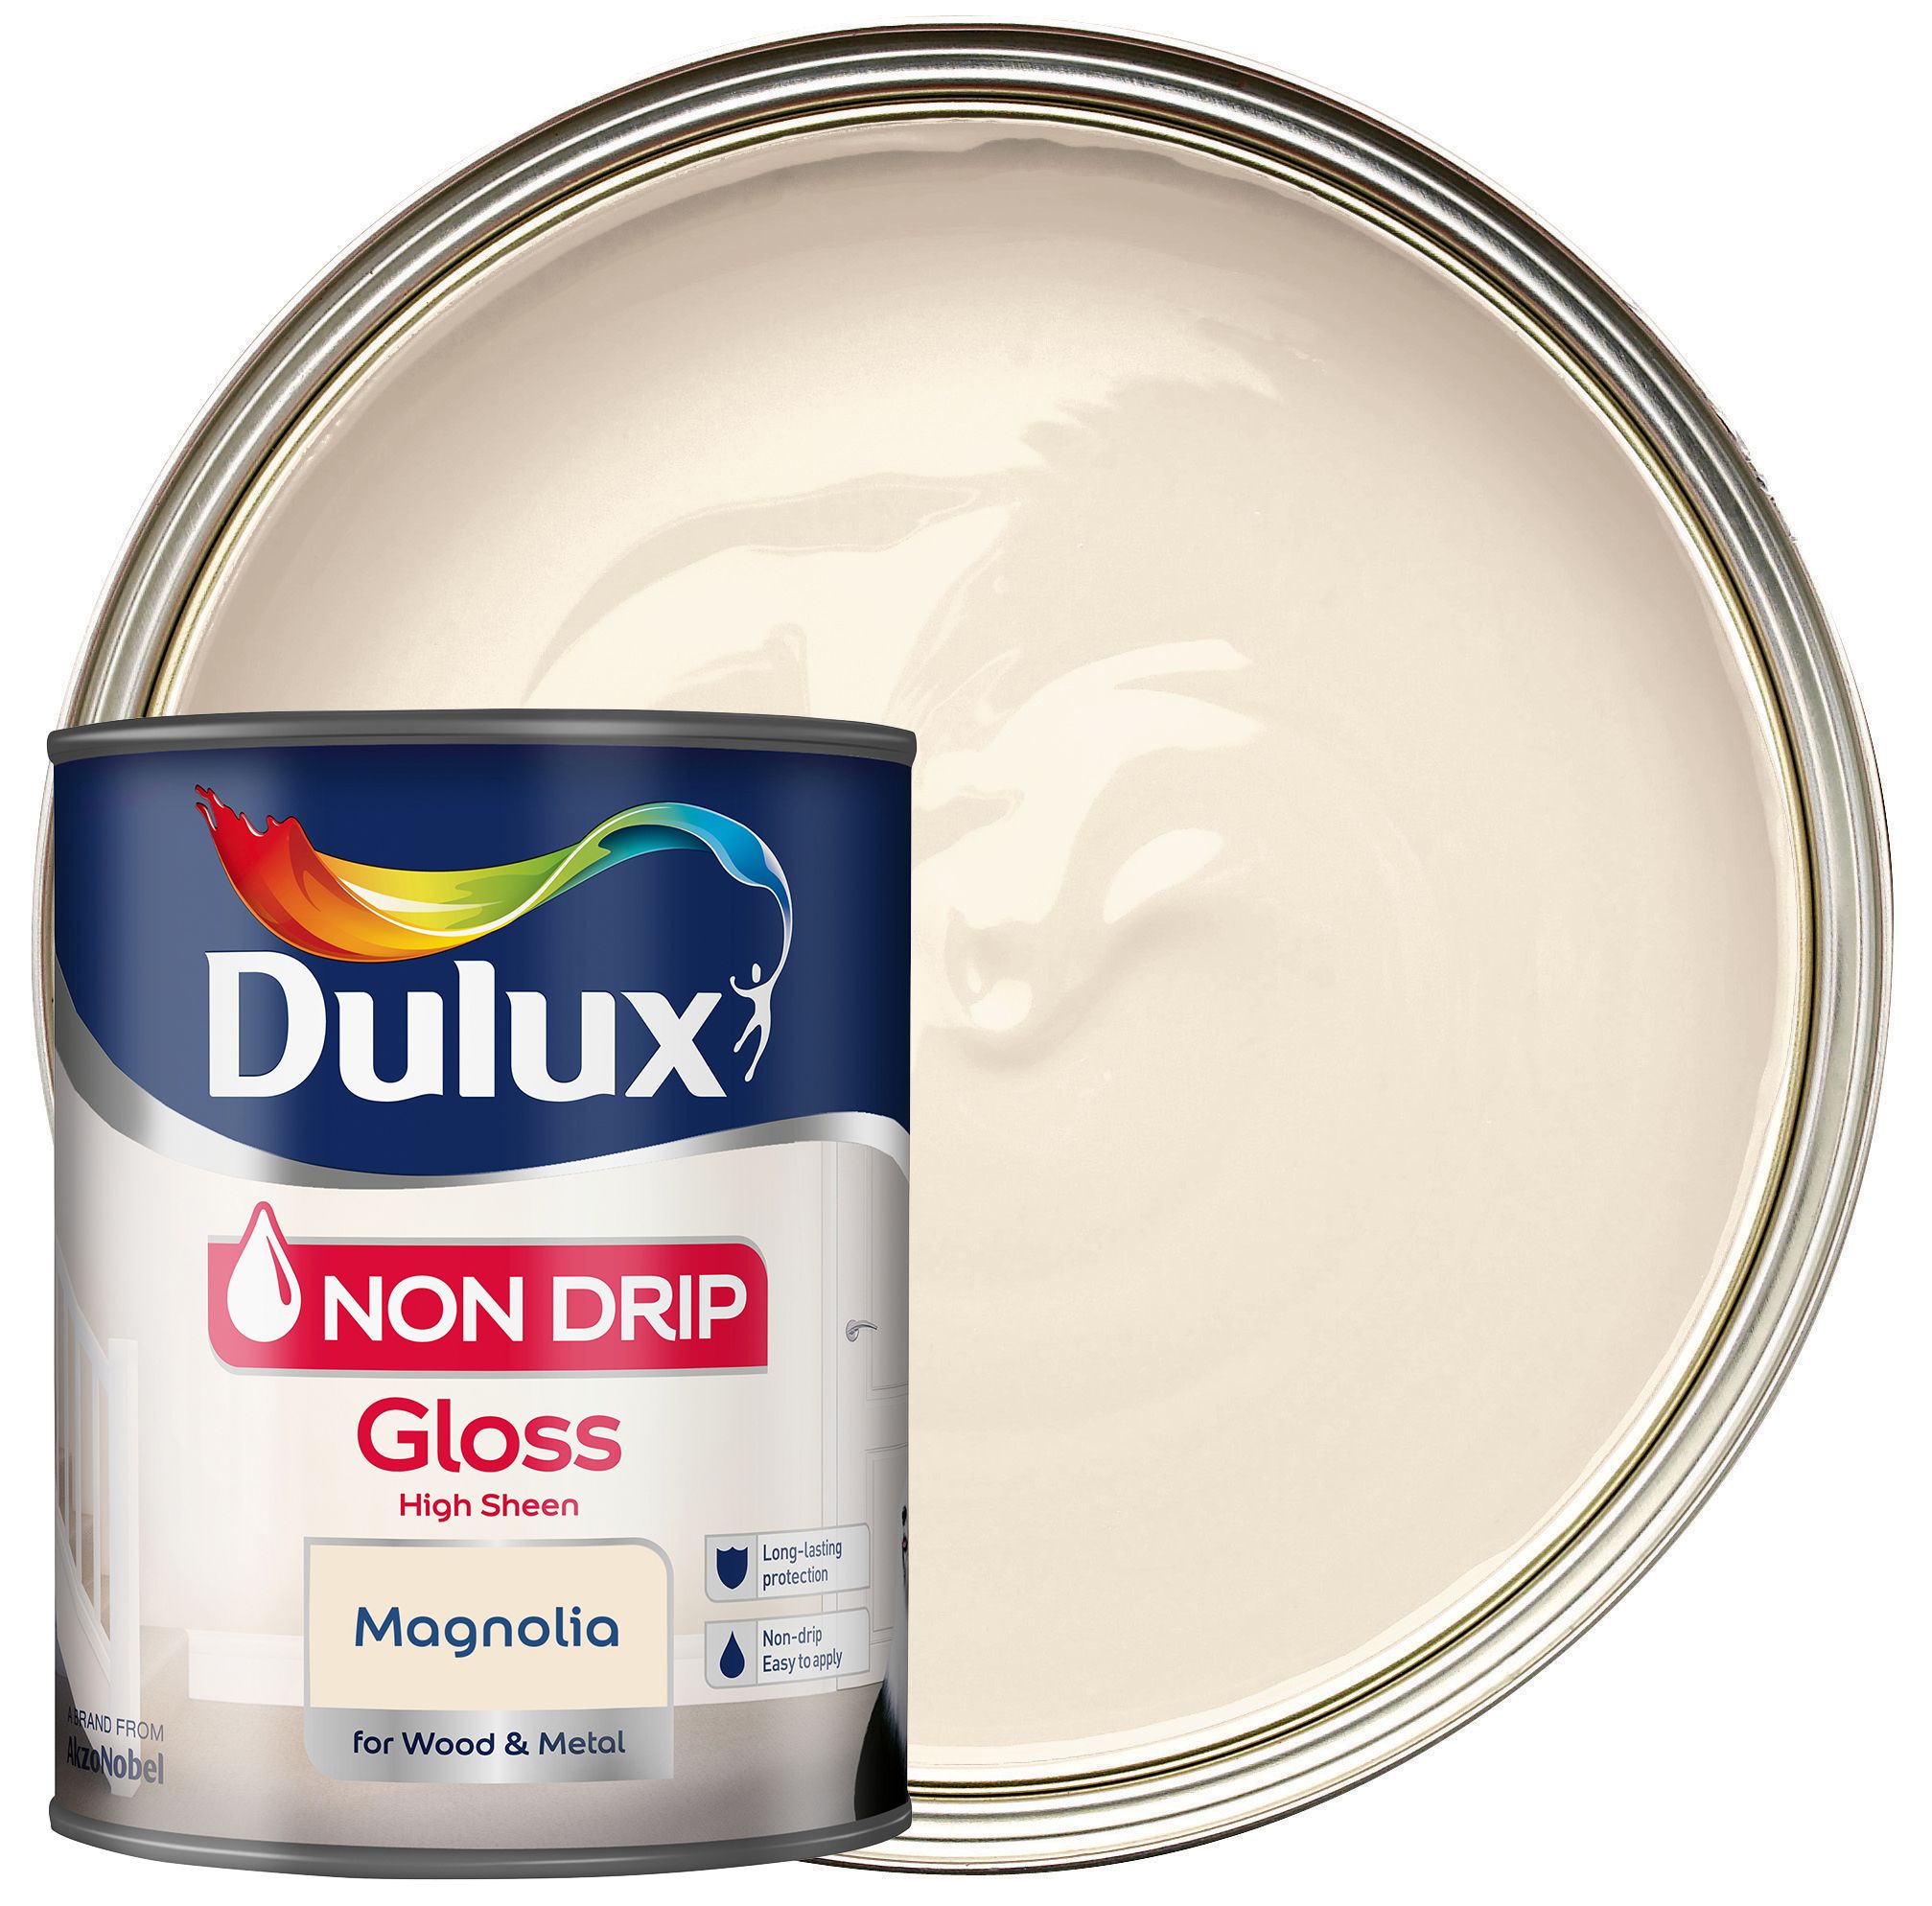 Image of Dulux Non Drip Gloss Paint - Magnolia - 750ml